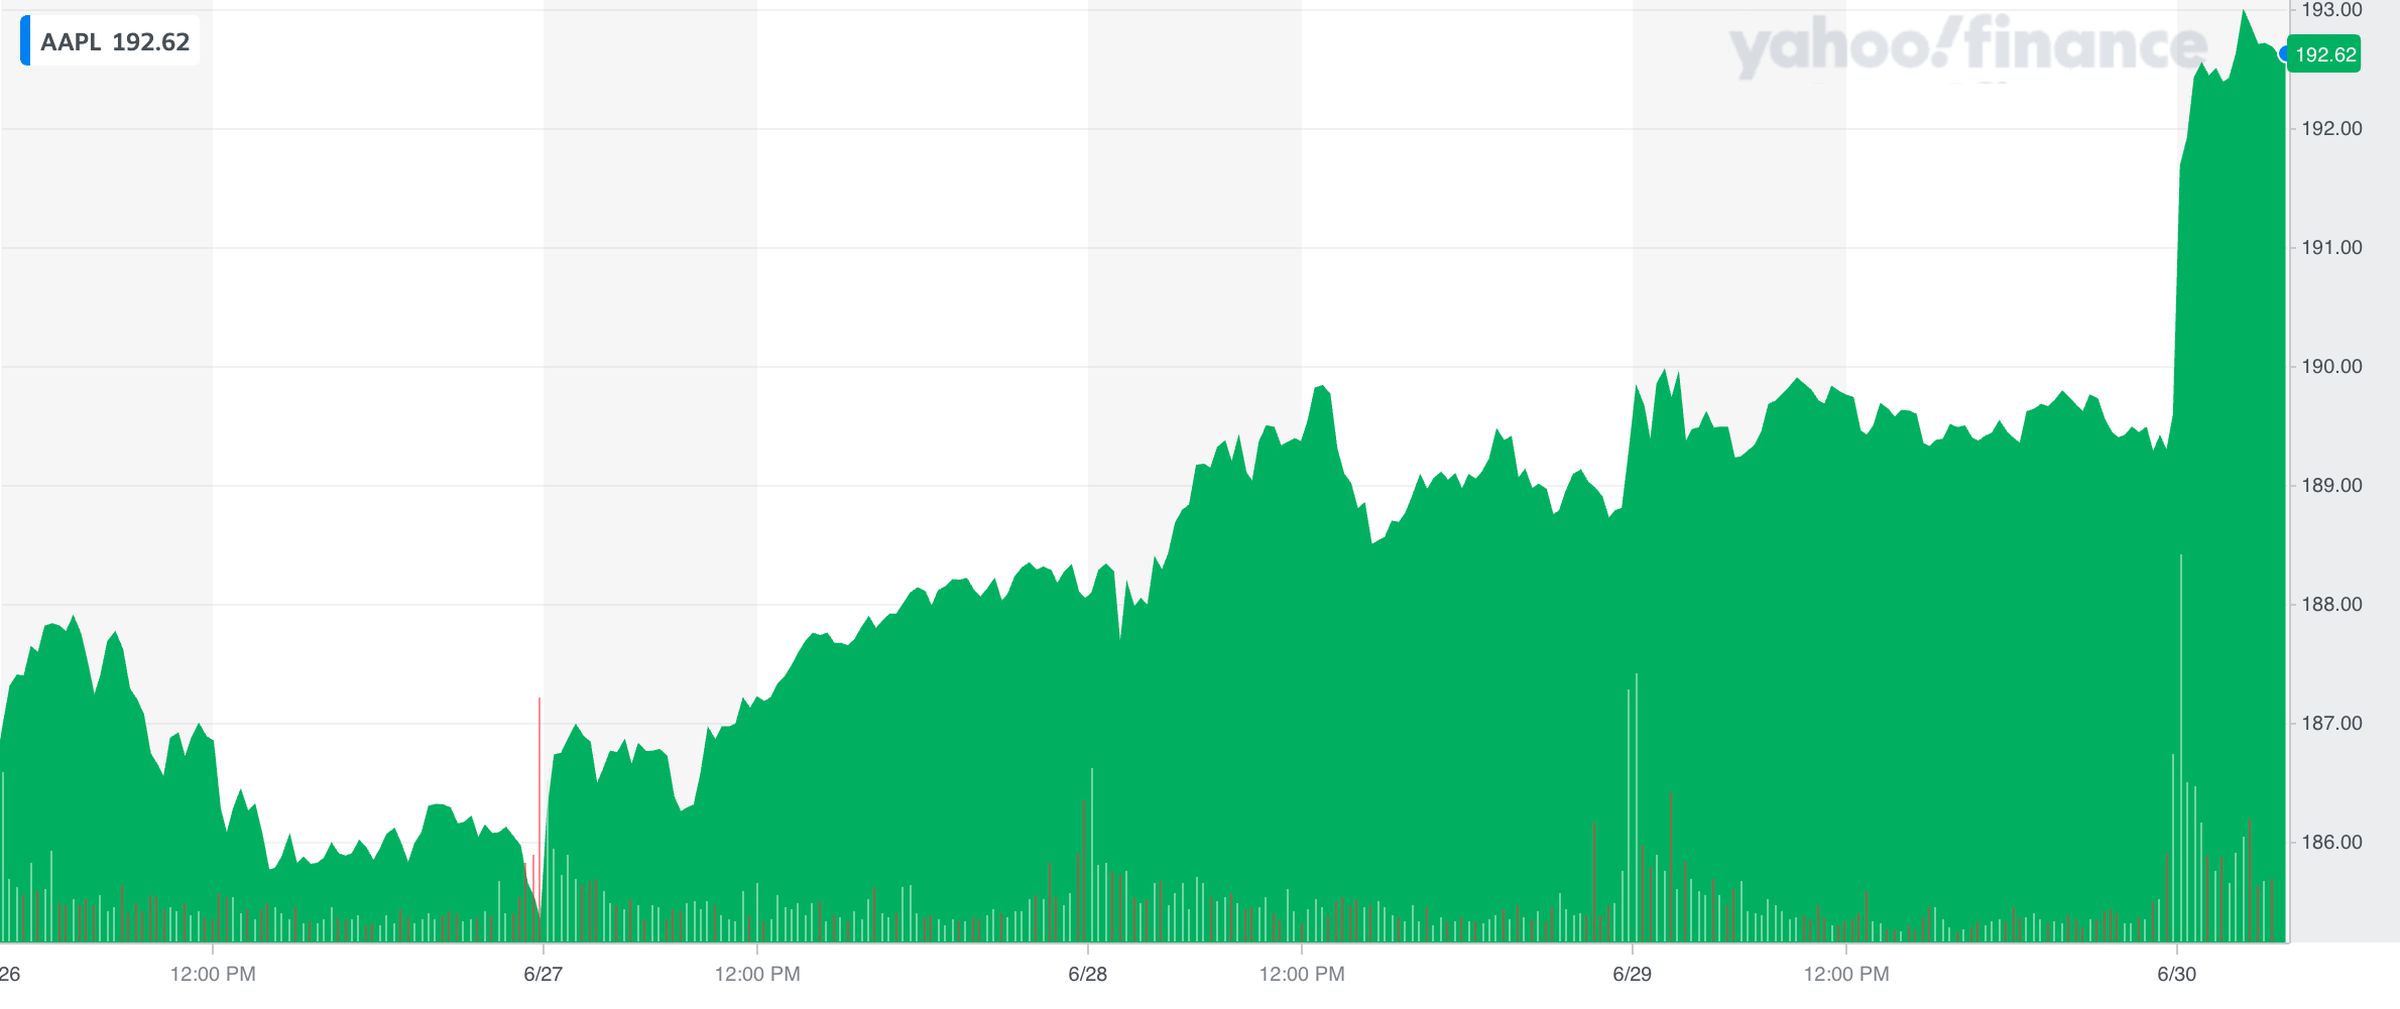 Five-day chart of AAPL stock price as it climbed above $192 per share